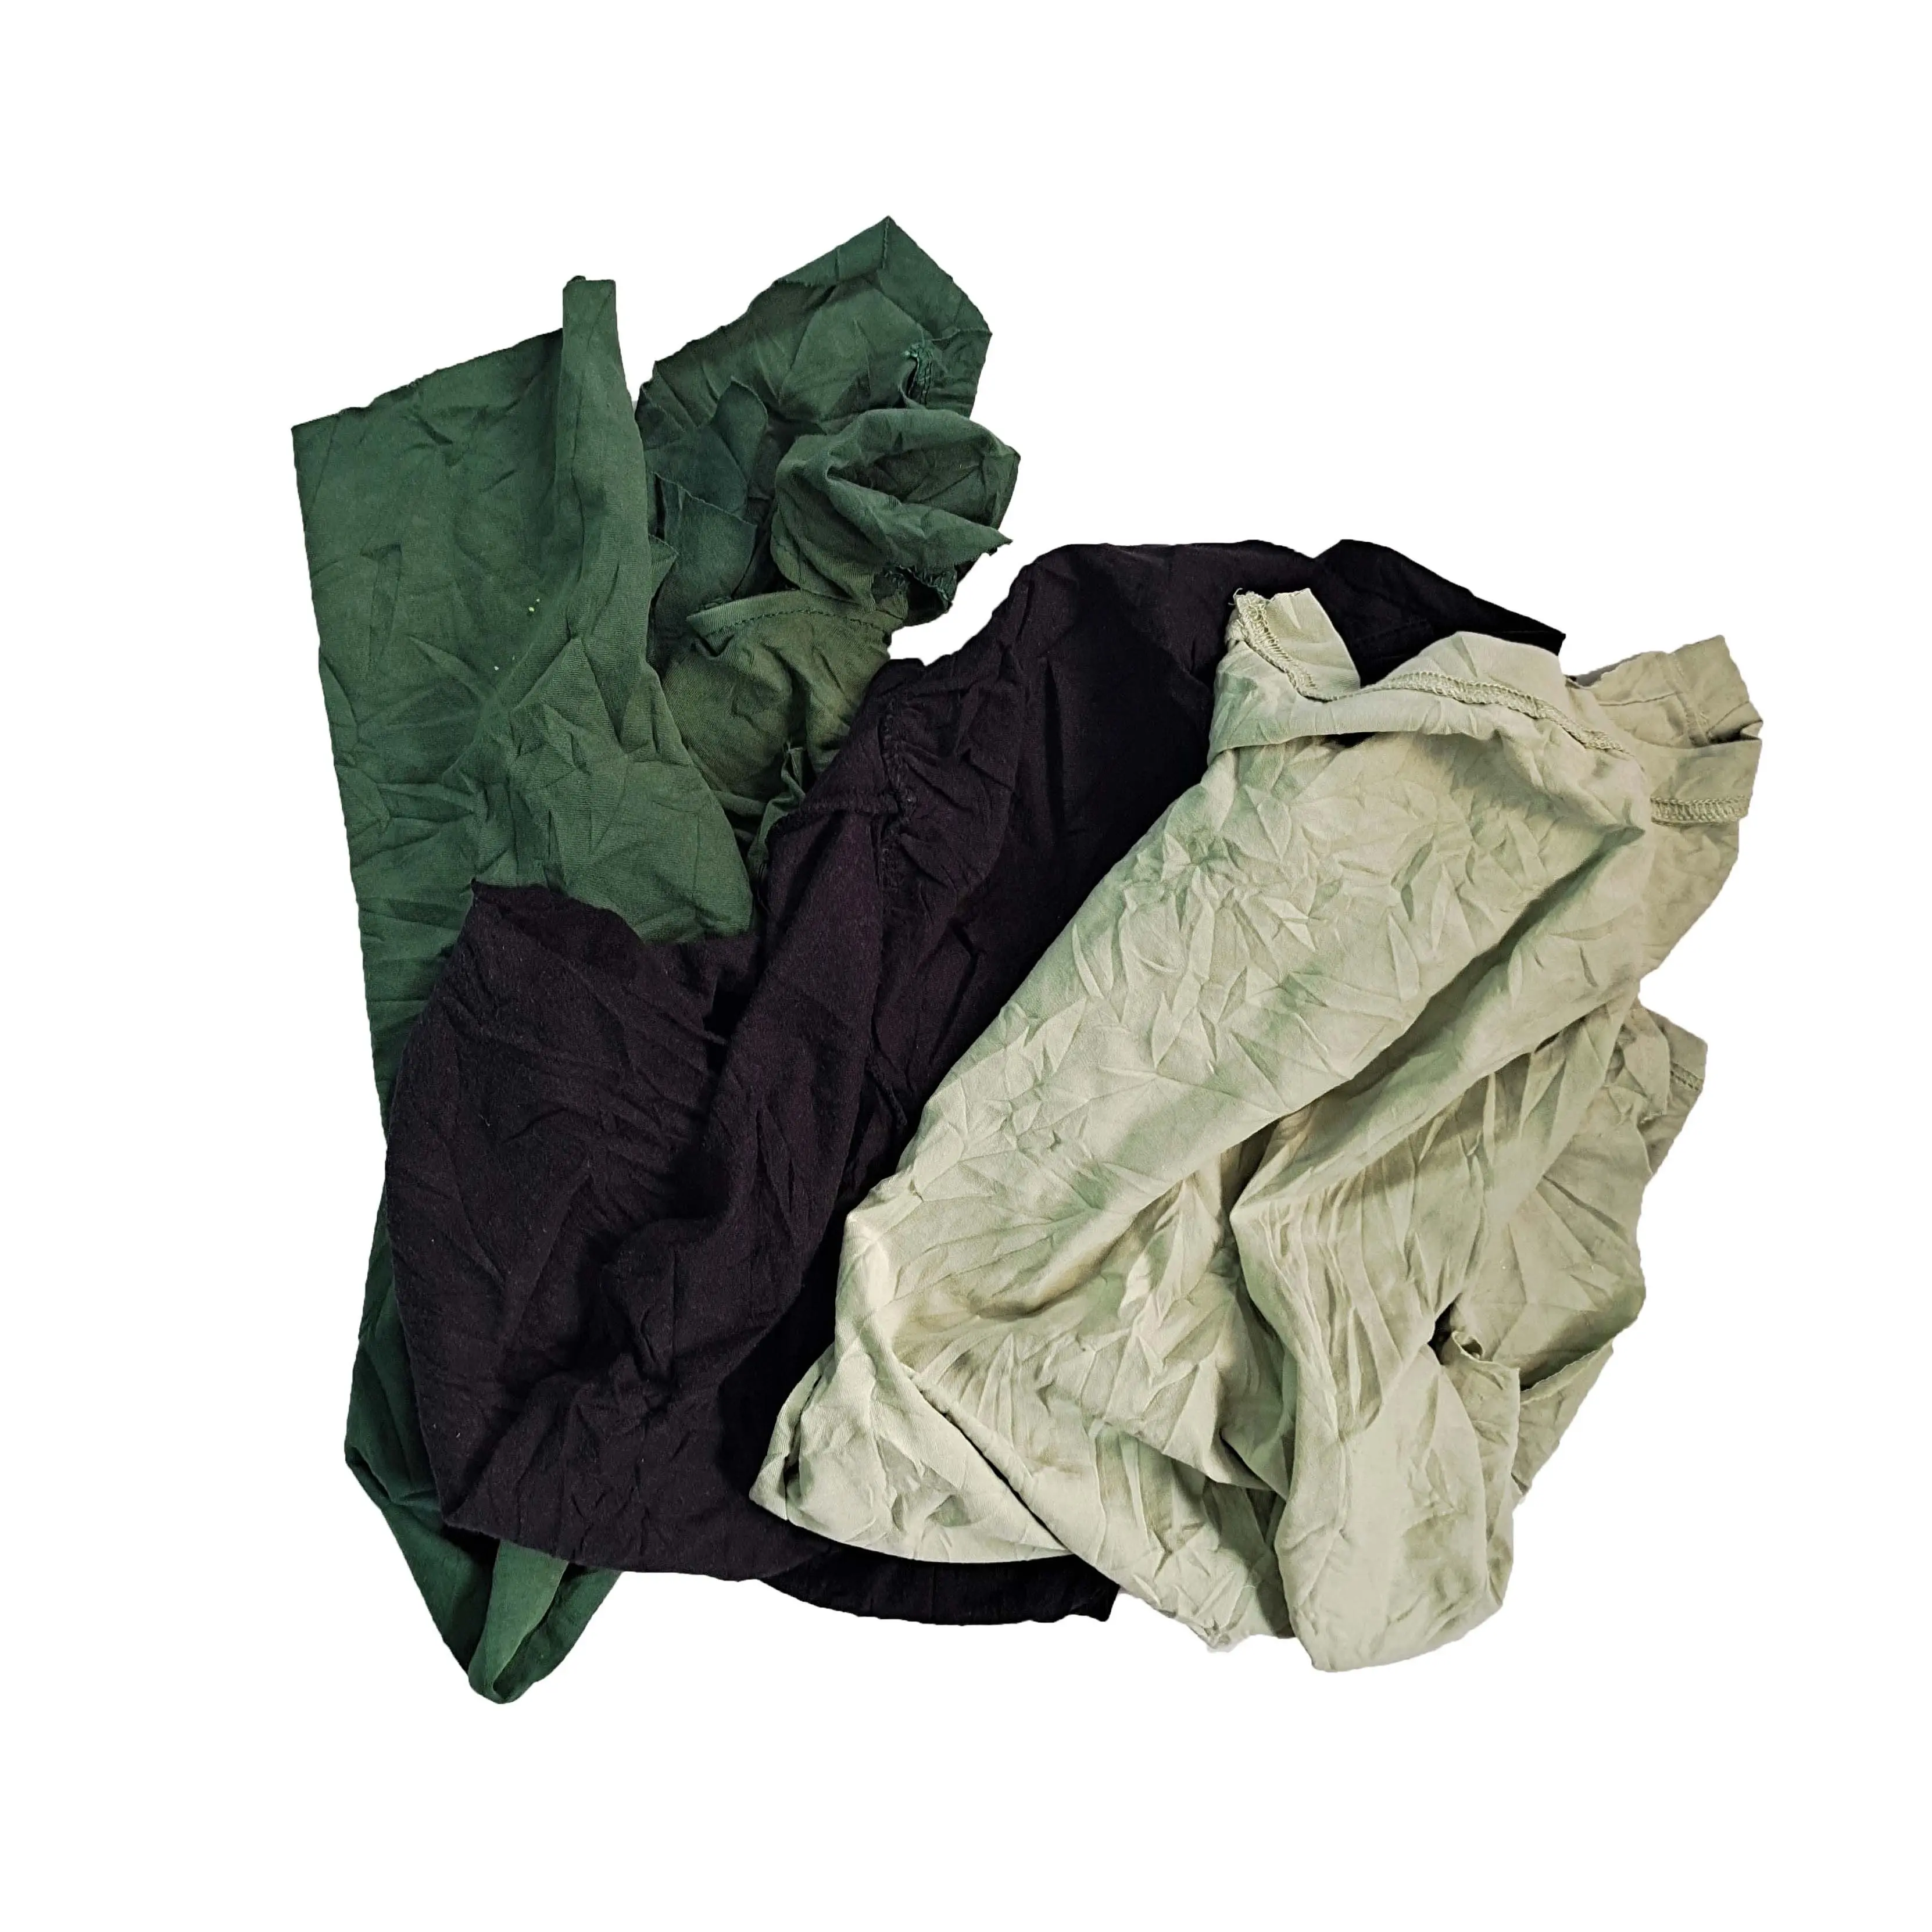 100 per cent cotton mixed dark color T shirt rags cloth scraps cleaning absorbent cloth rags